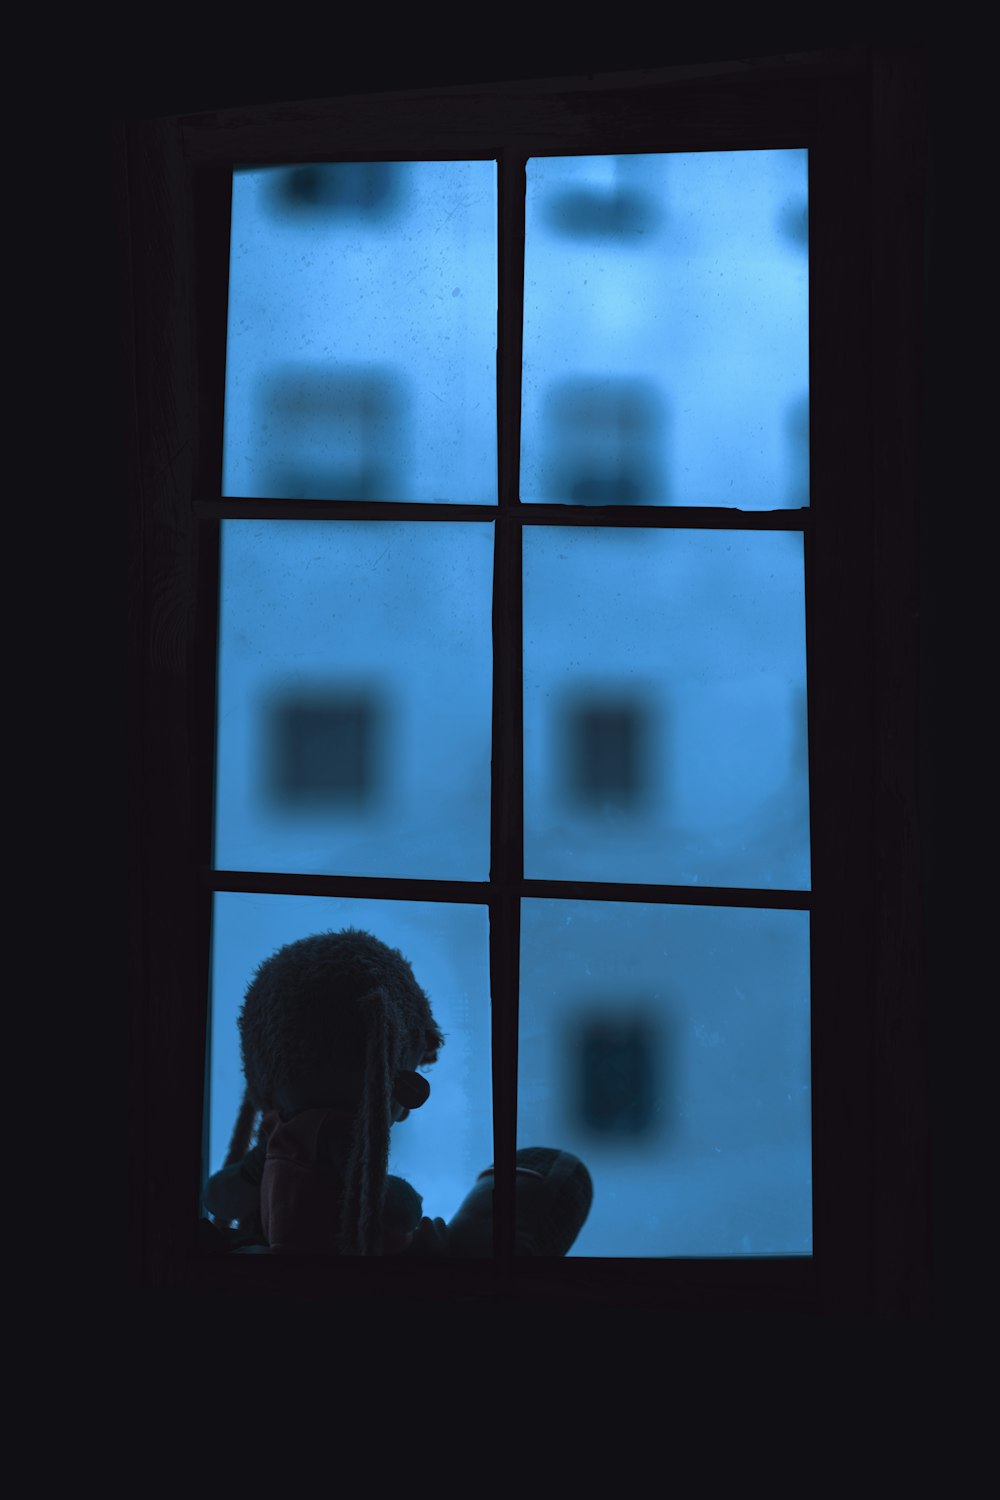 silhouette of person standing near window